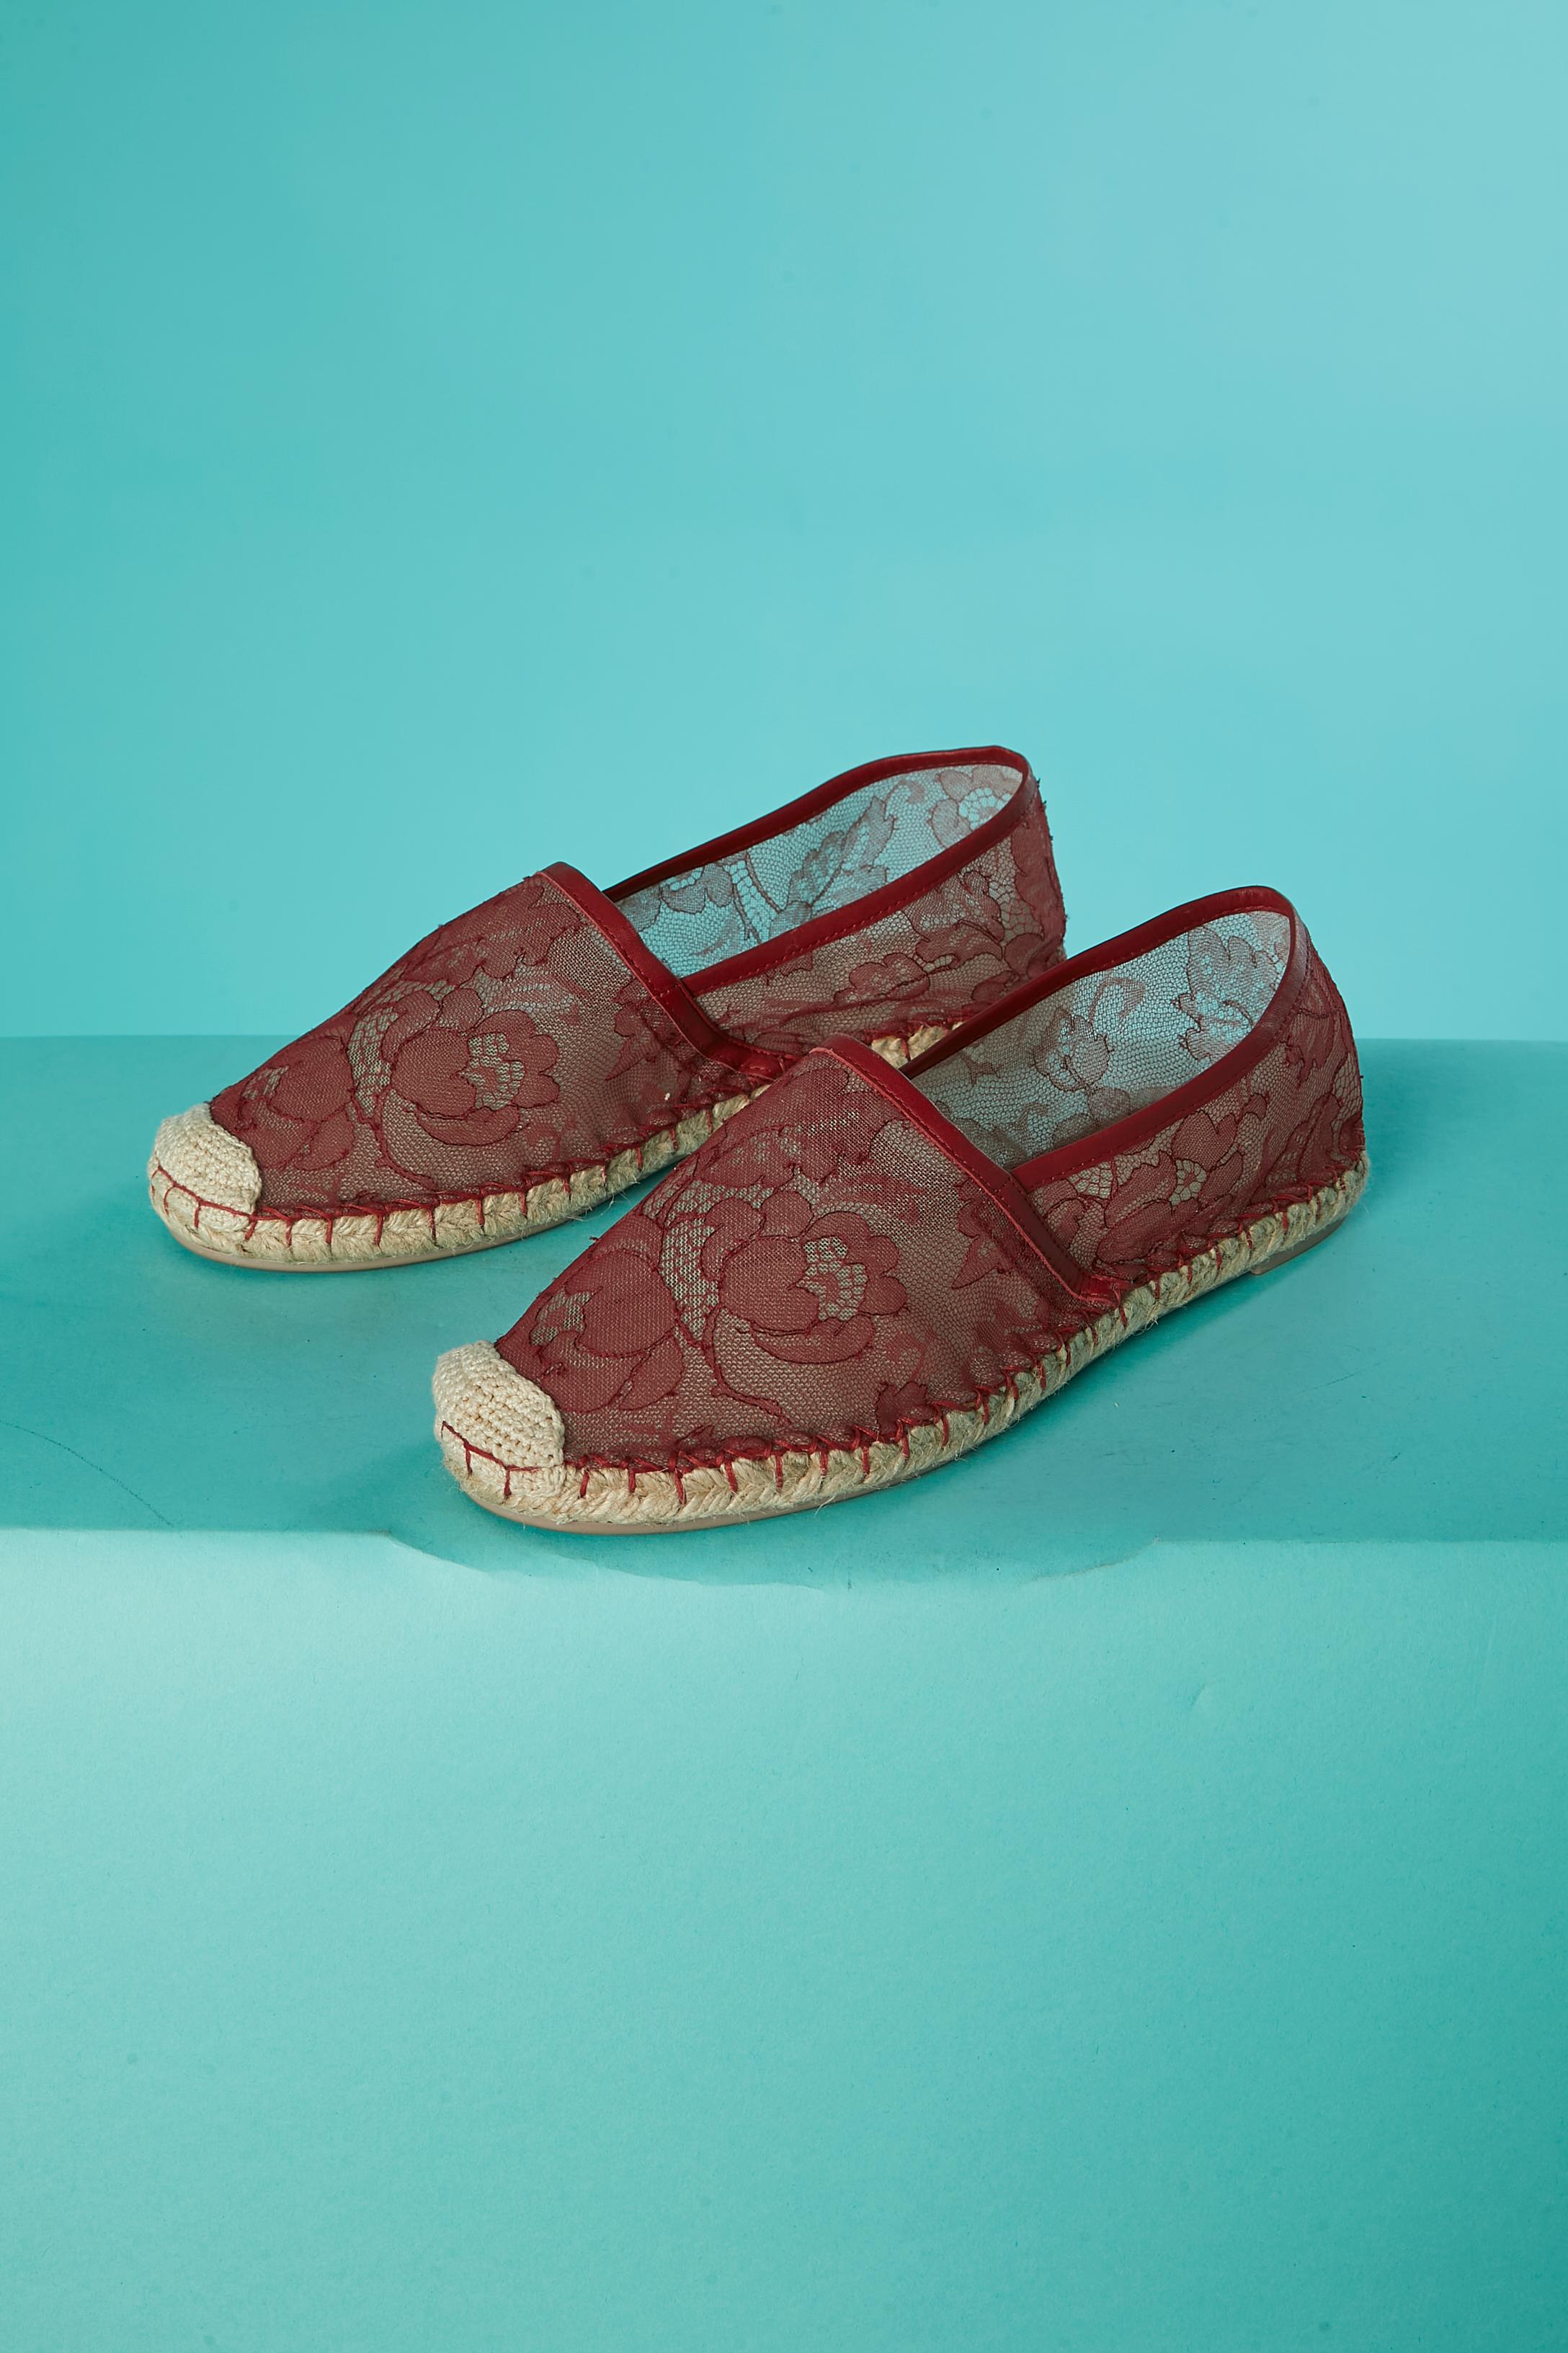 Red lace espadrilles with cord sole.
SHOE SIZE : 37 (EU) 6 (US)